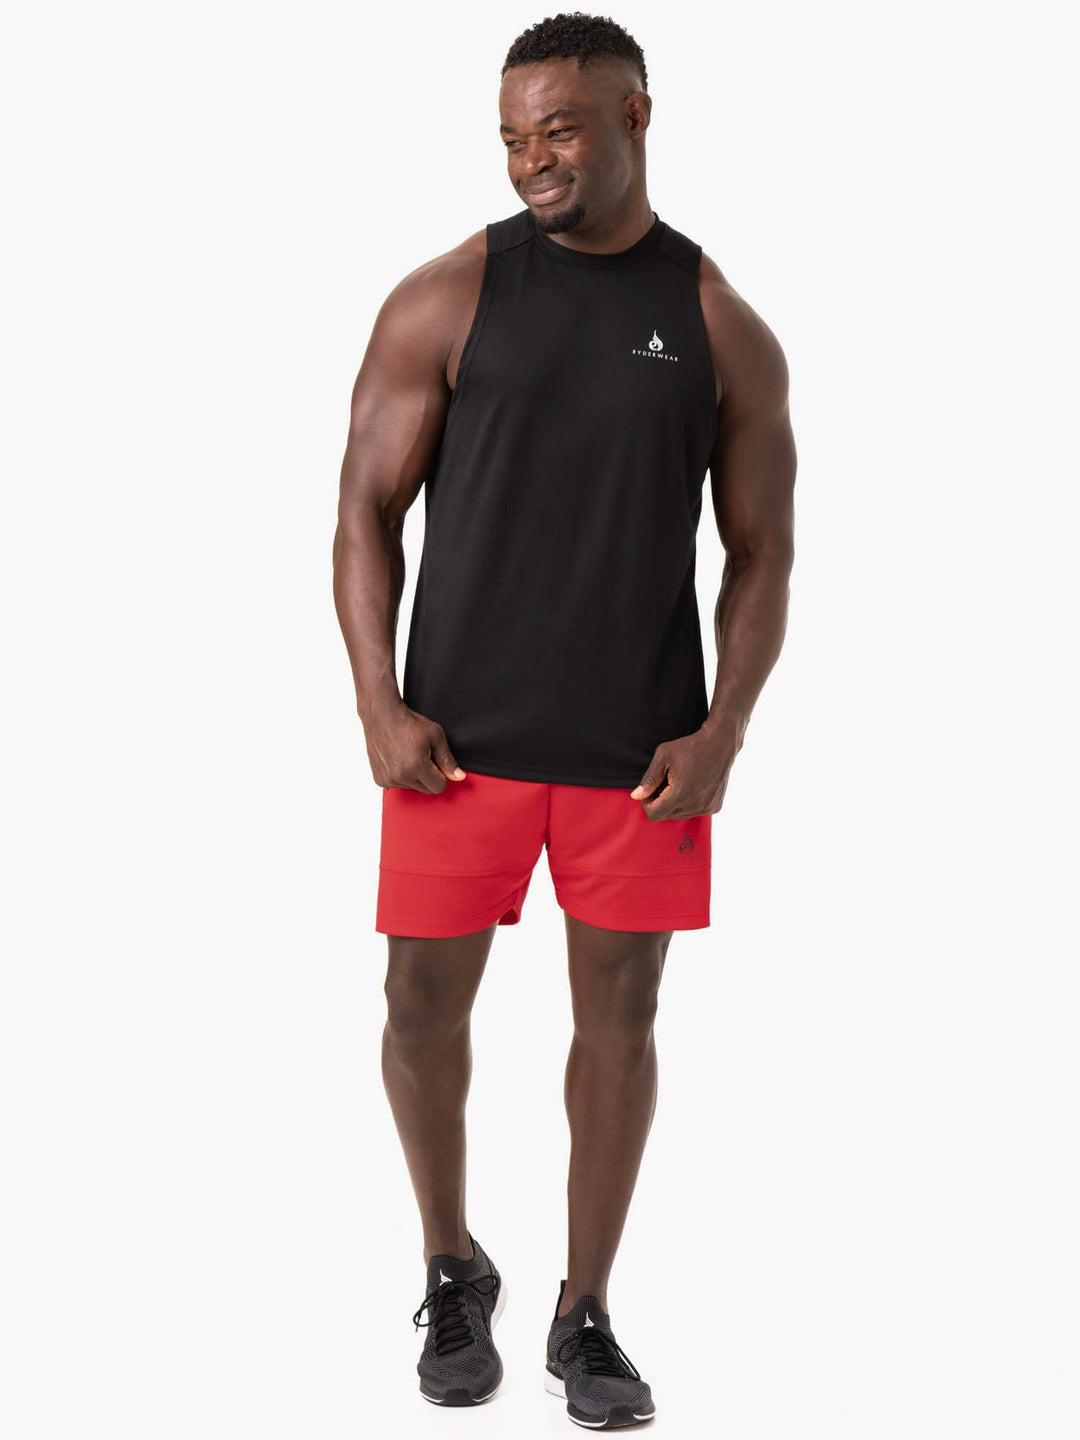 Action Mesh Short - Red Clothing Ryderwear 